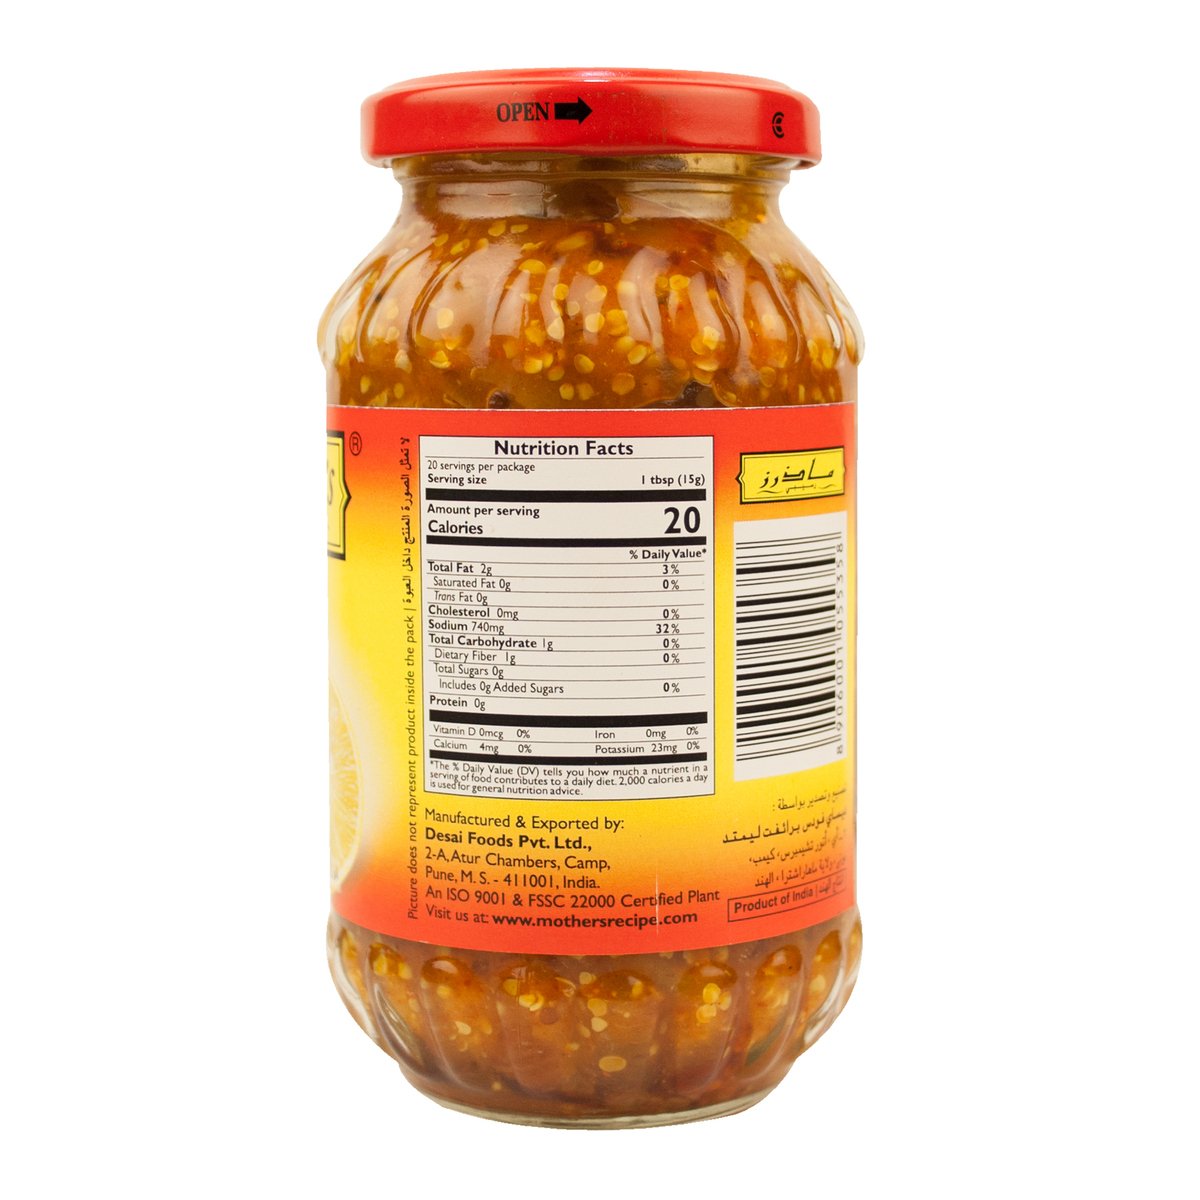 Mother's Recipe Mild Lime Pickle 300 g